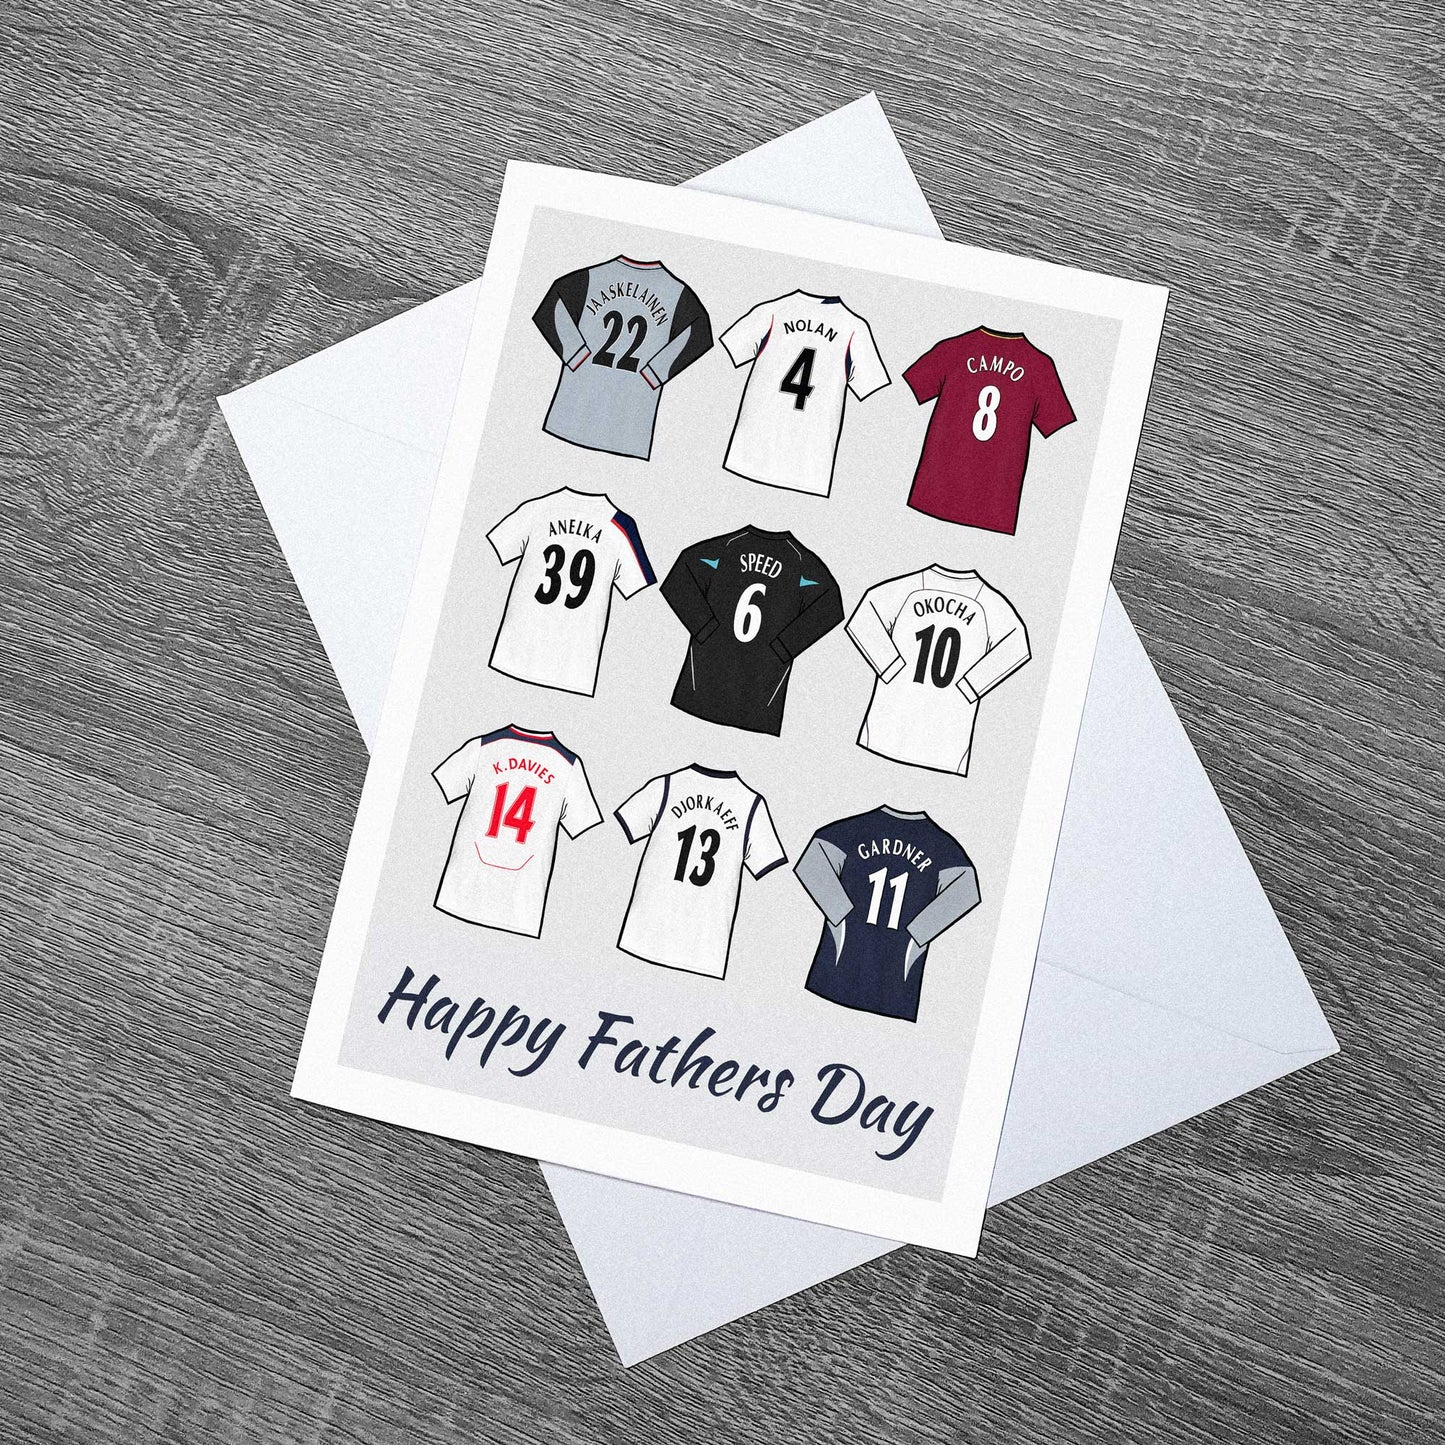 Fathers day card Bolton Wanderers themed featuring some of the greatest player jerseys in their history! 